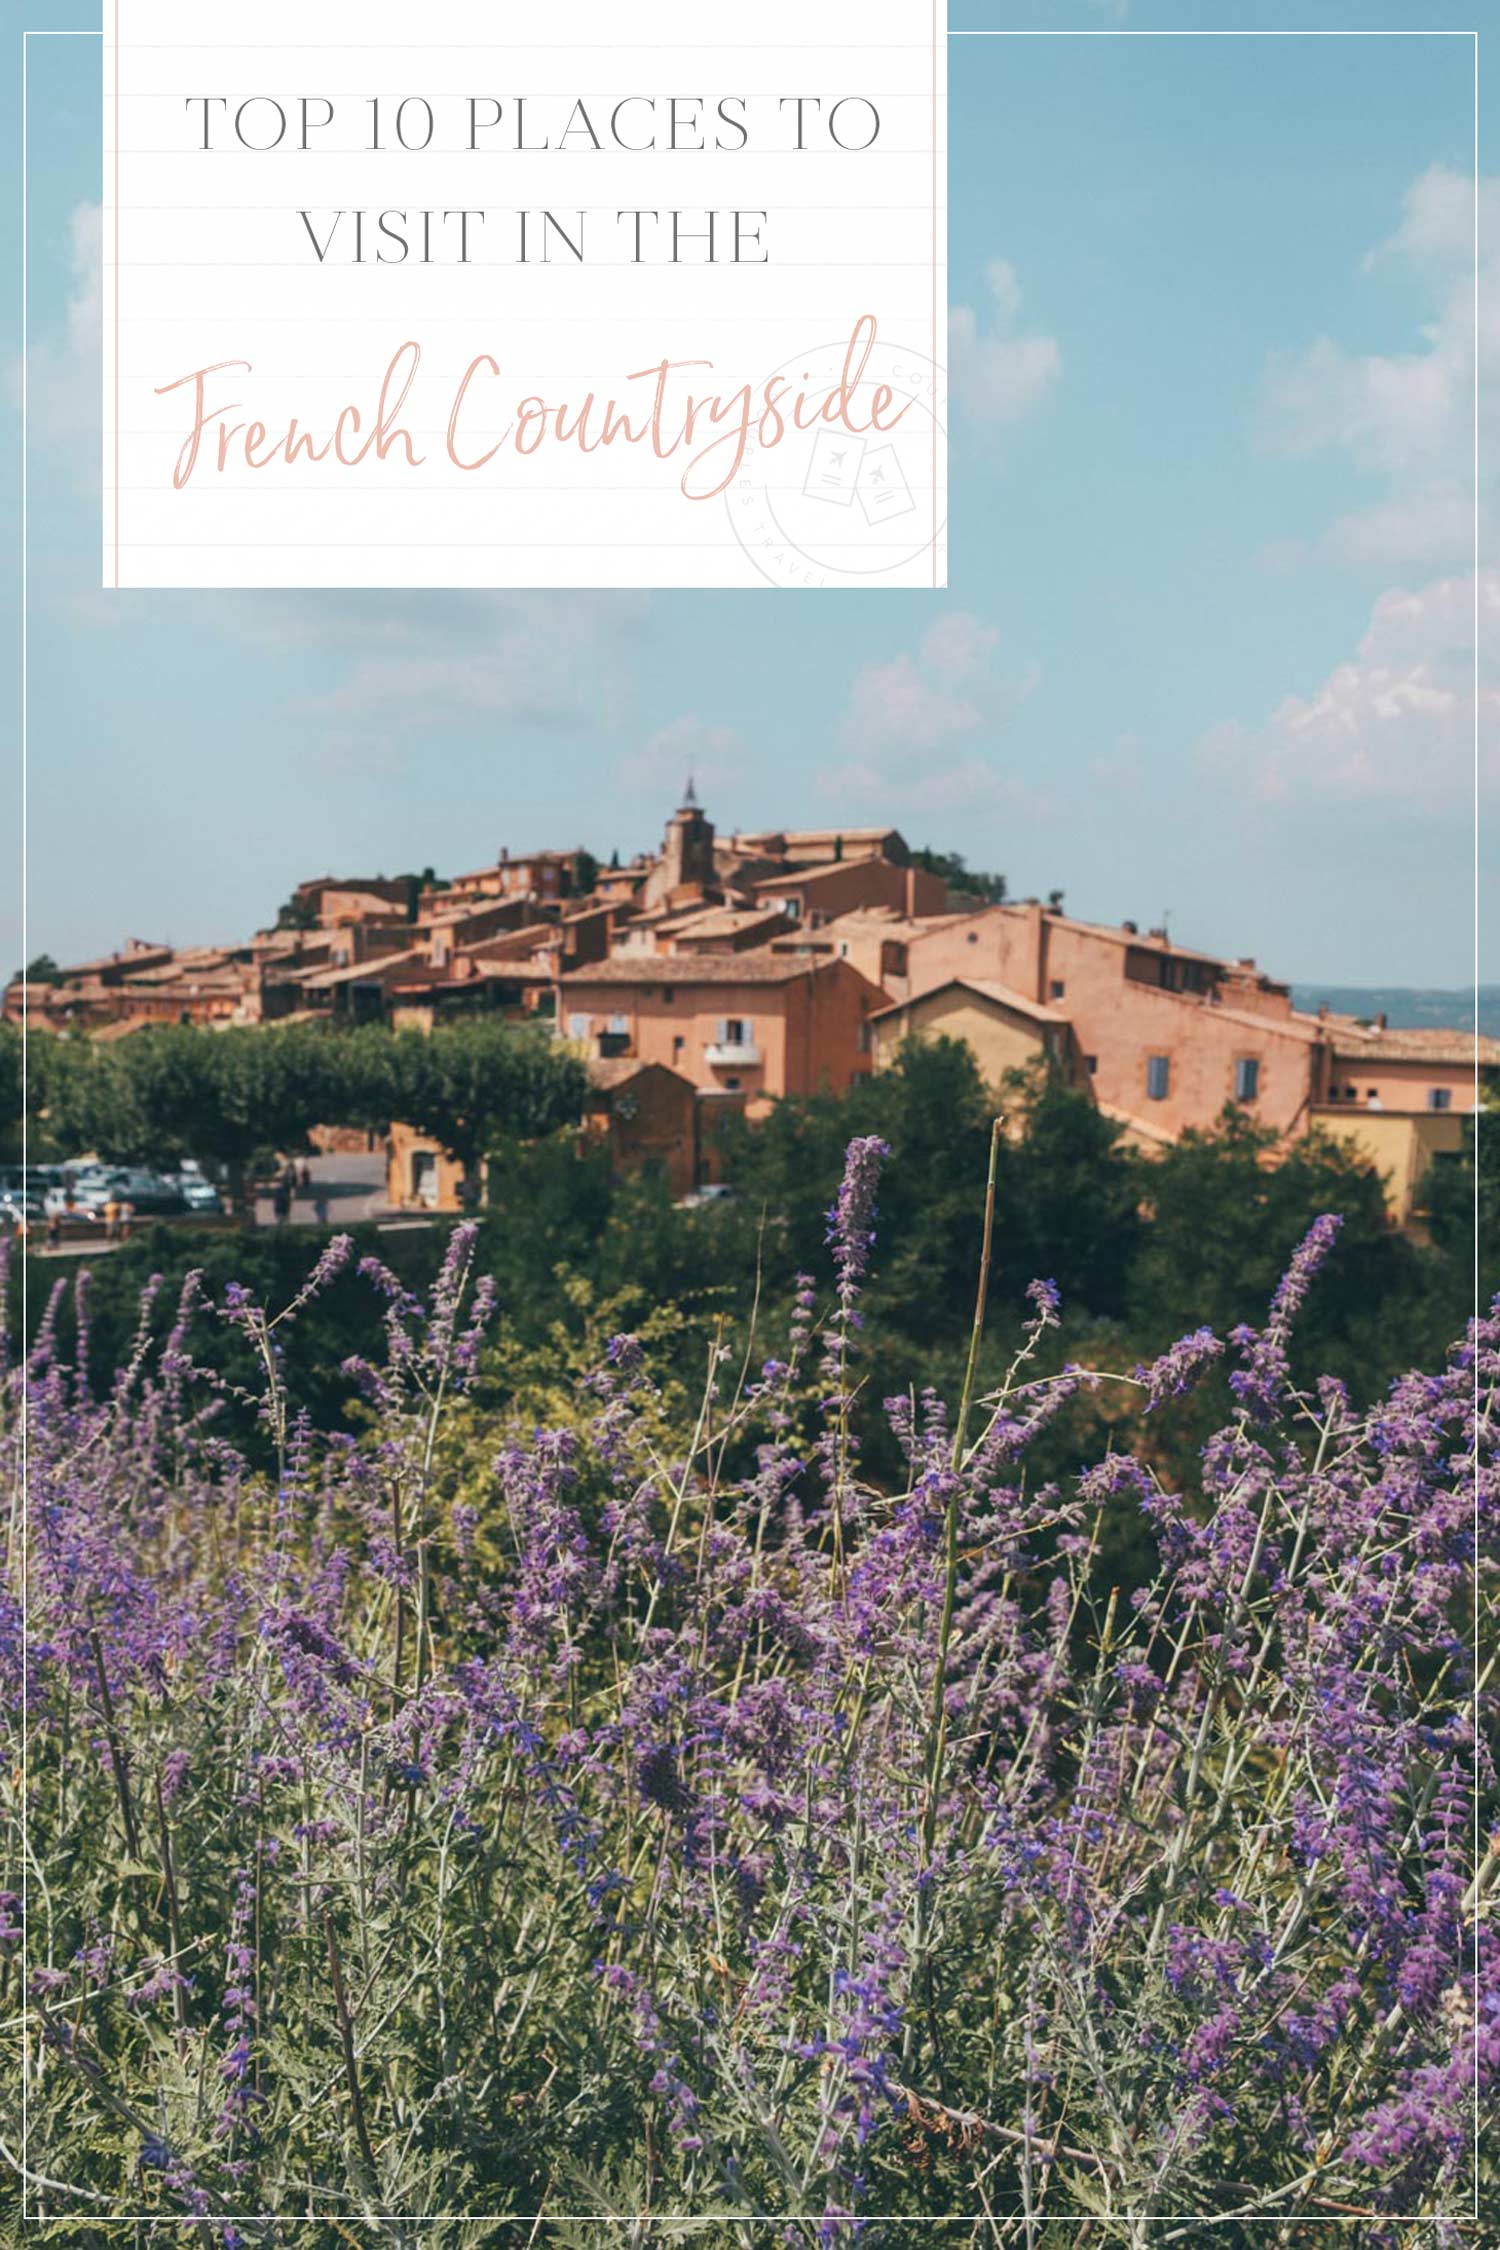 Top 10 Places to Visit in the French Countryside